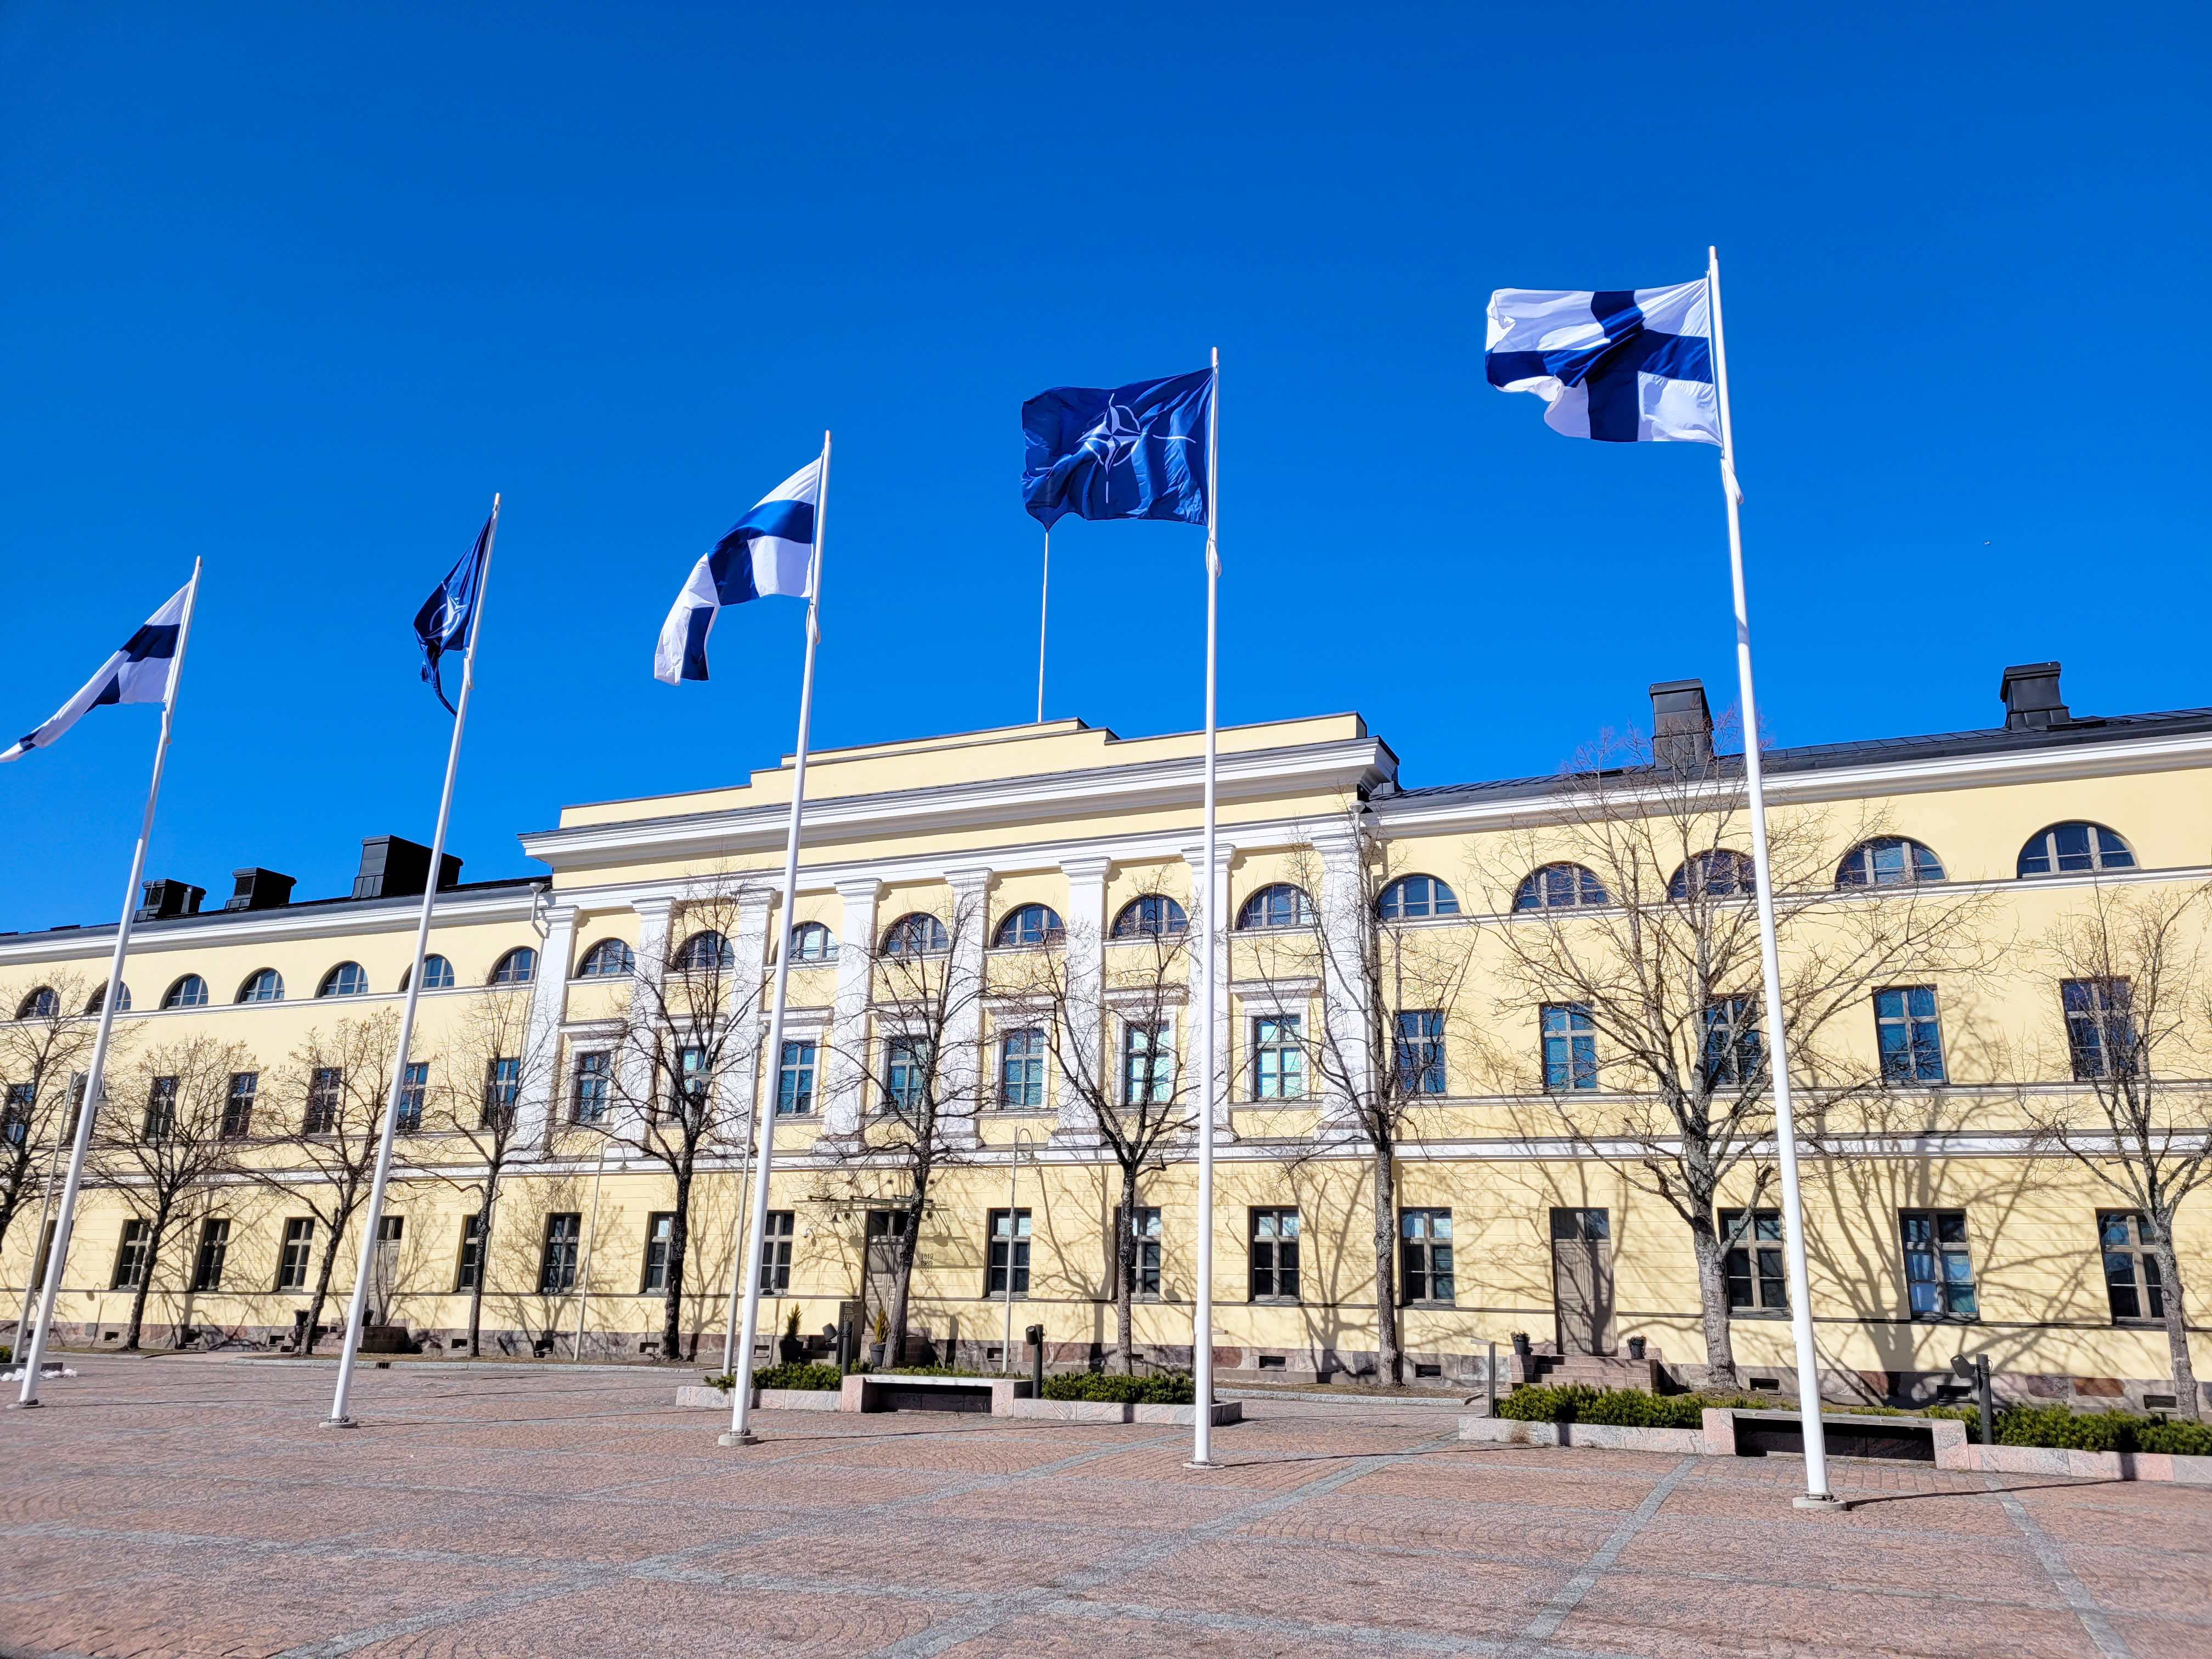 Helsinki will host the two-day NATO NEPAC meeting